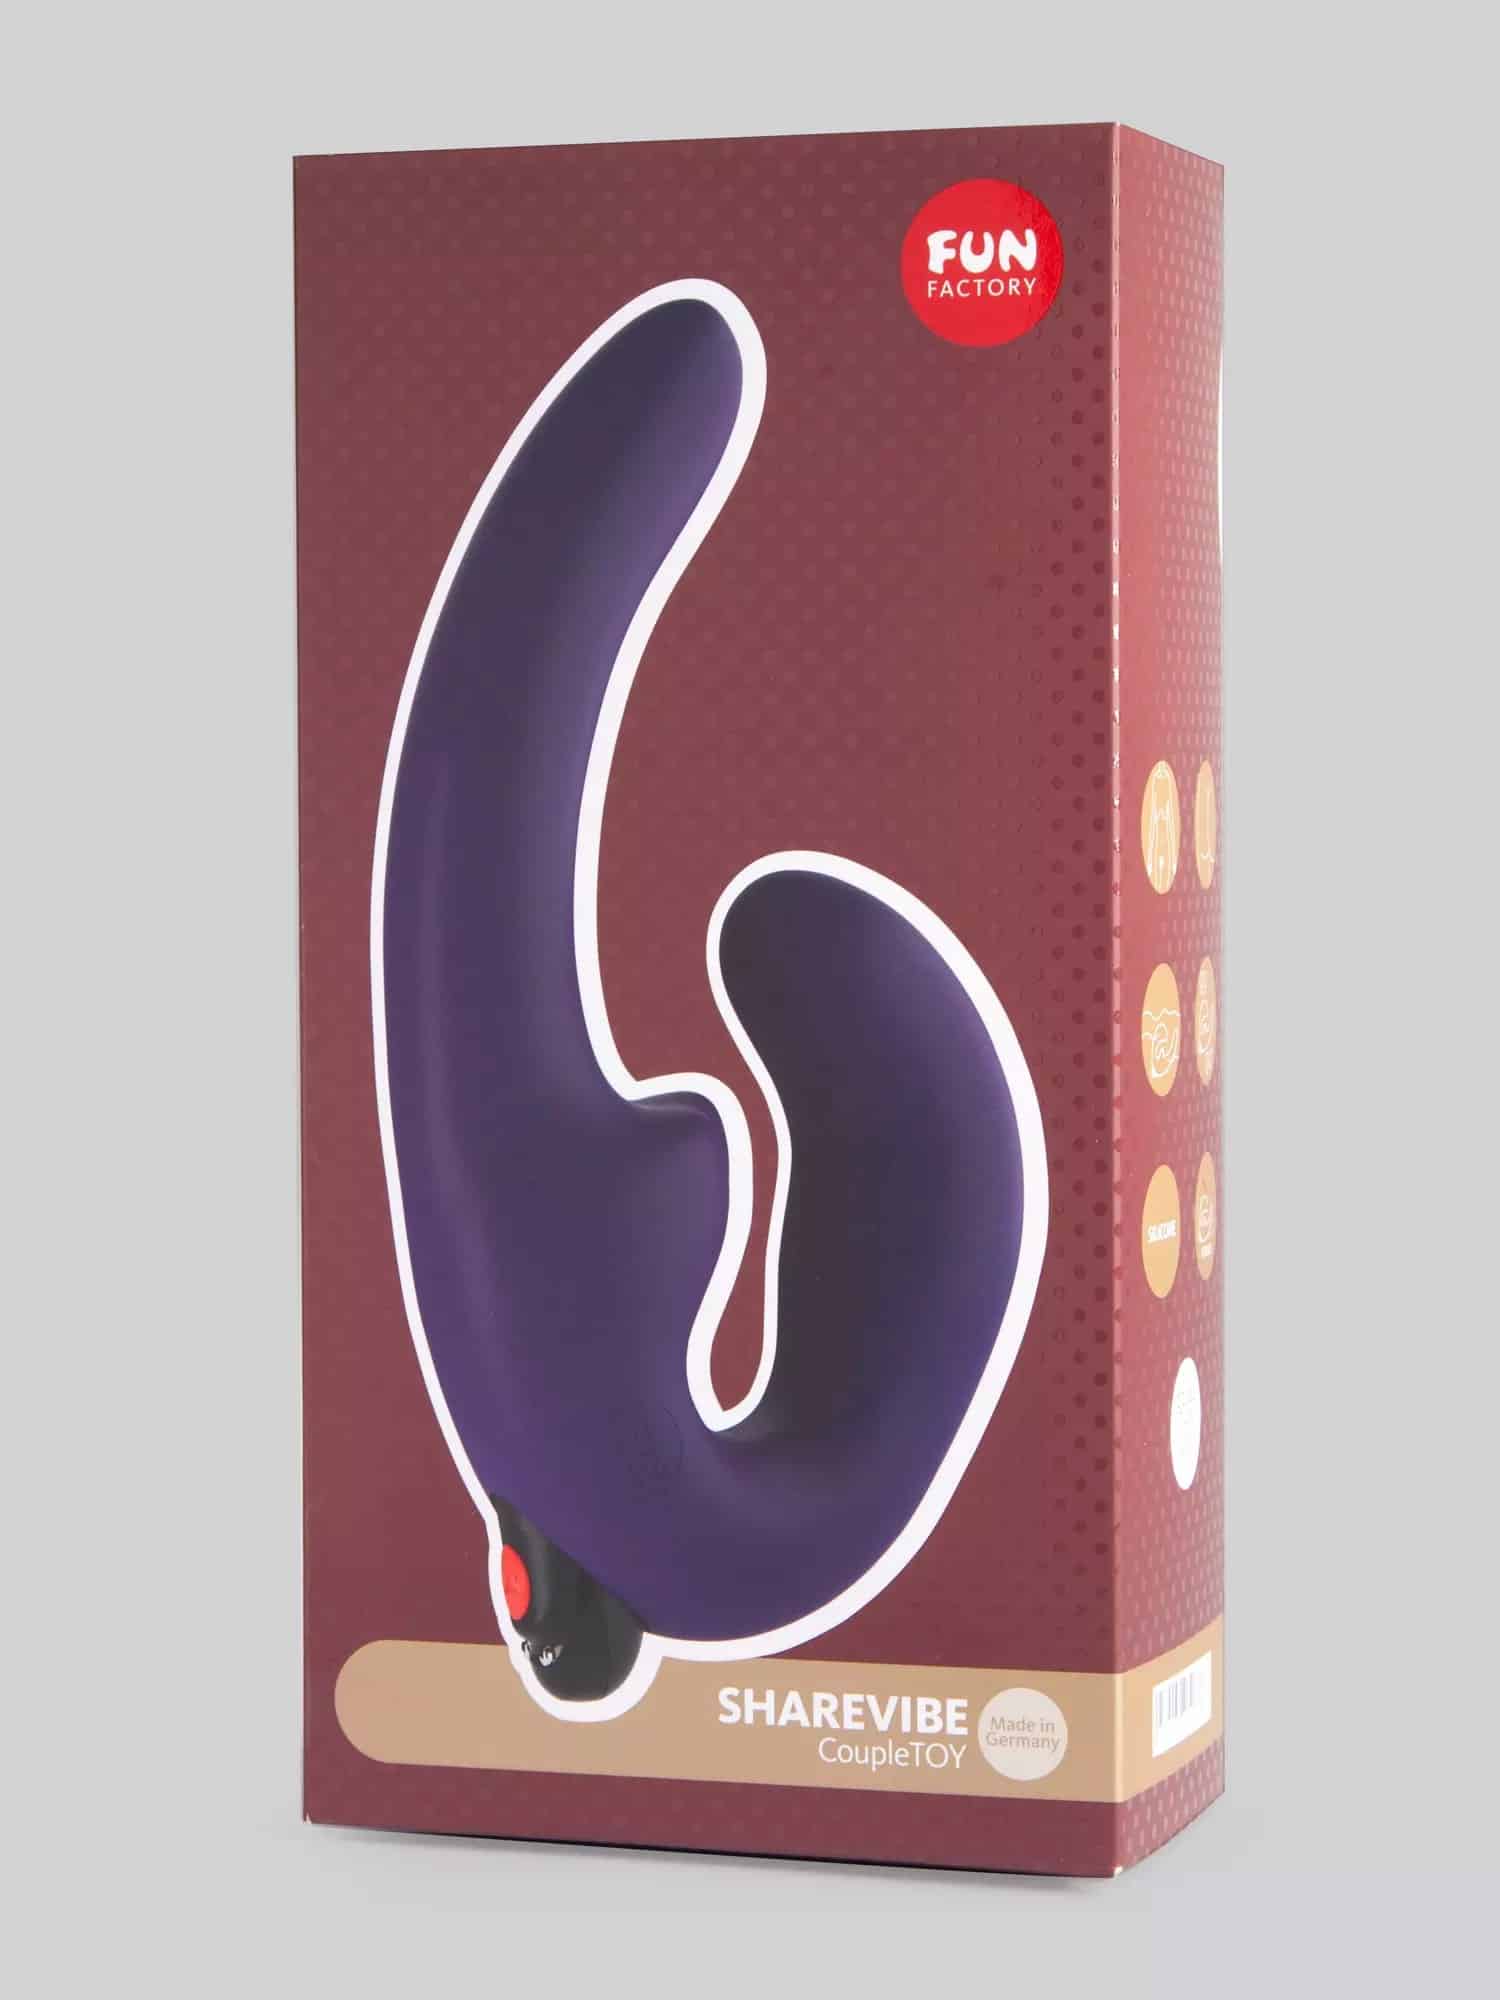 Fun Factory ShareVibe Rechargeable Vibrating Strapless Strap-On Dildo. Slide 15